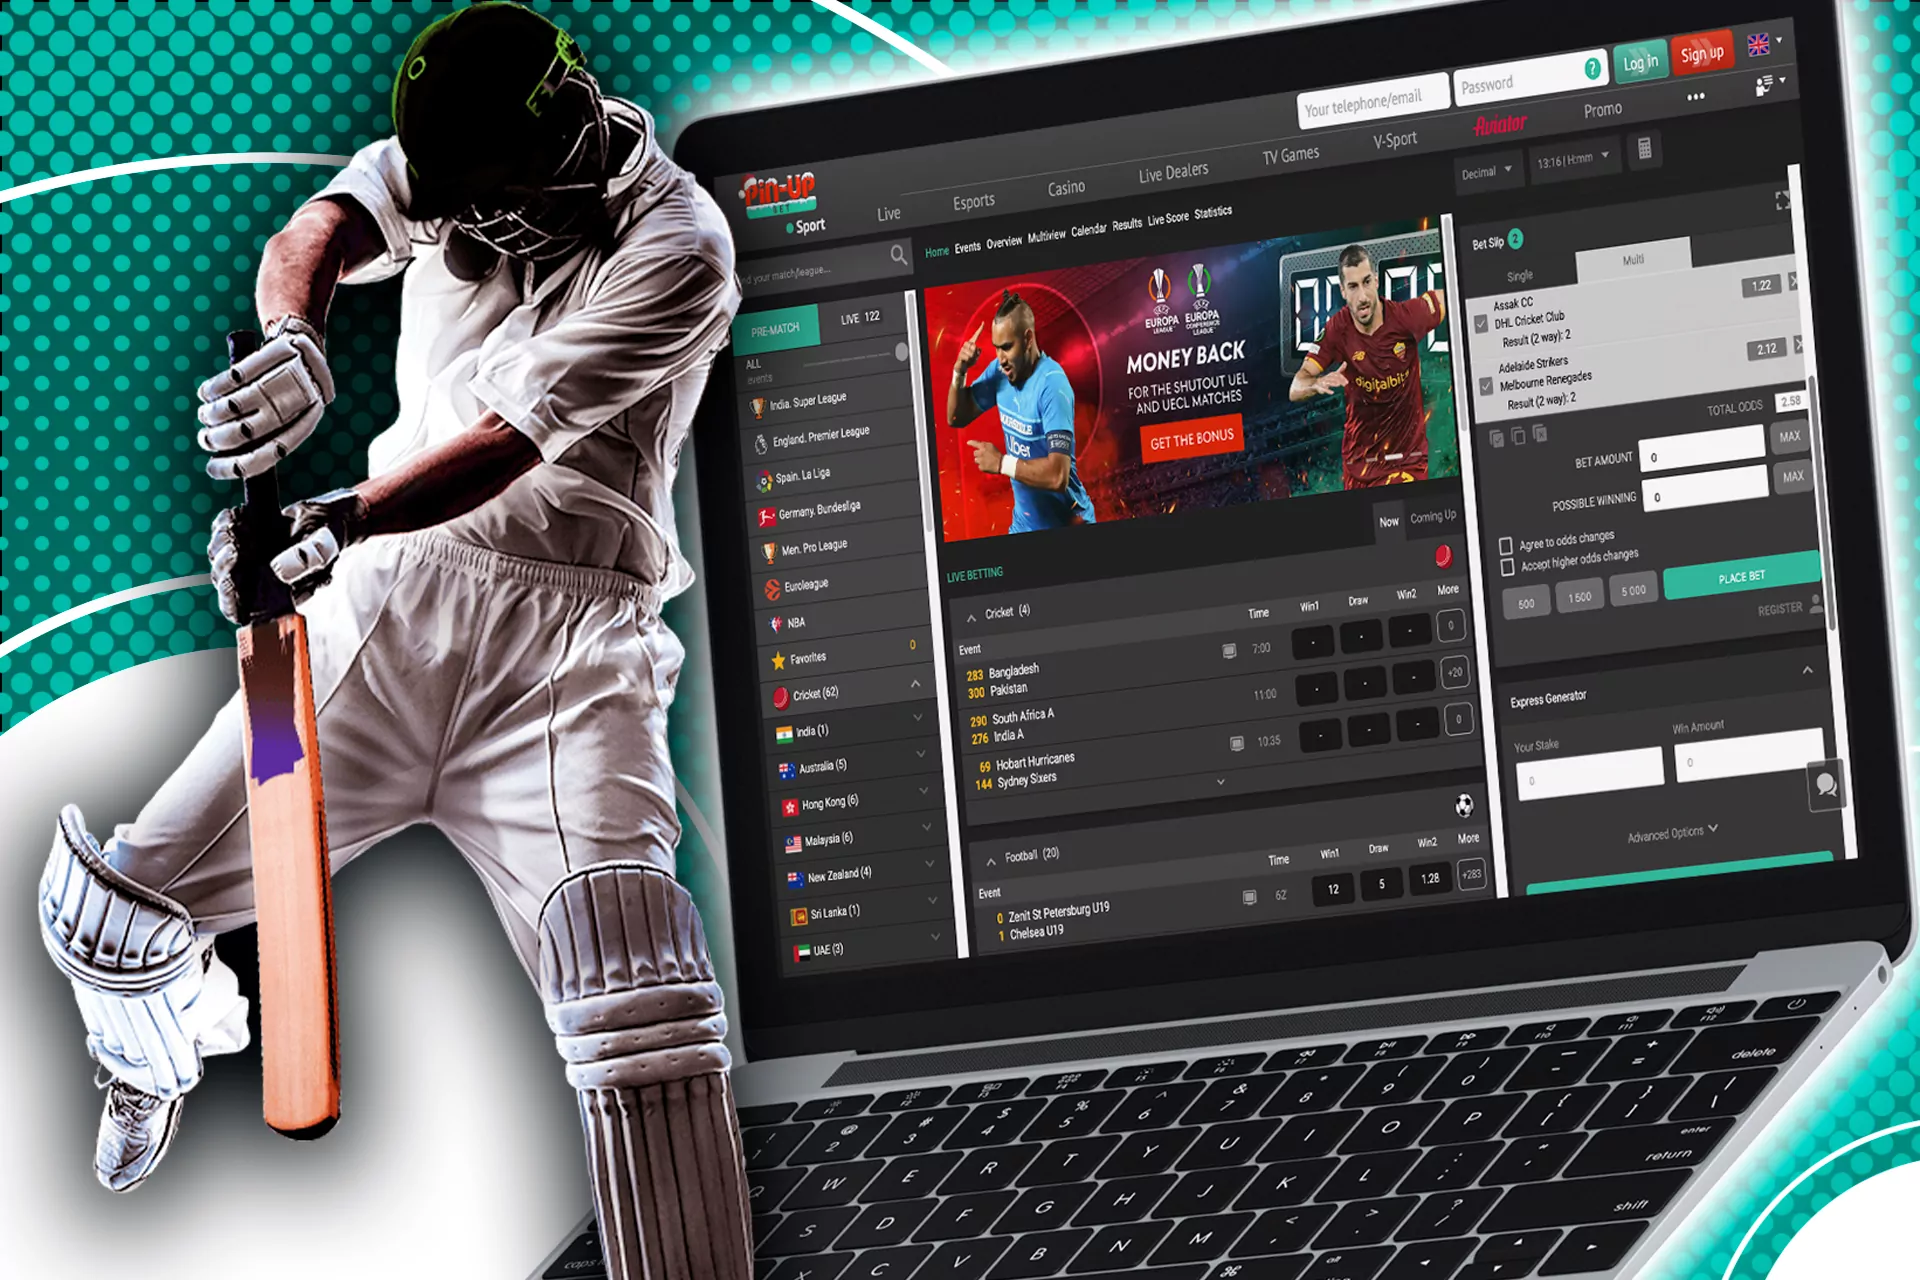 You can bet on any of popular cricket leagues.